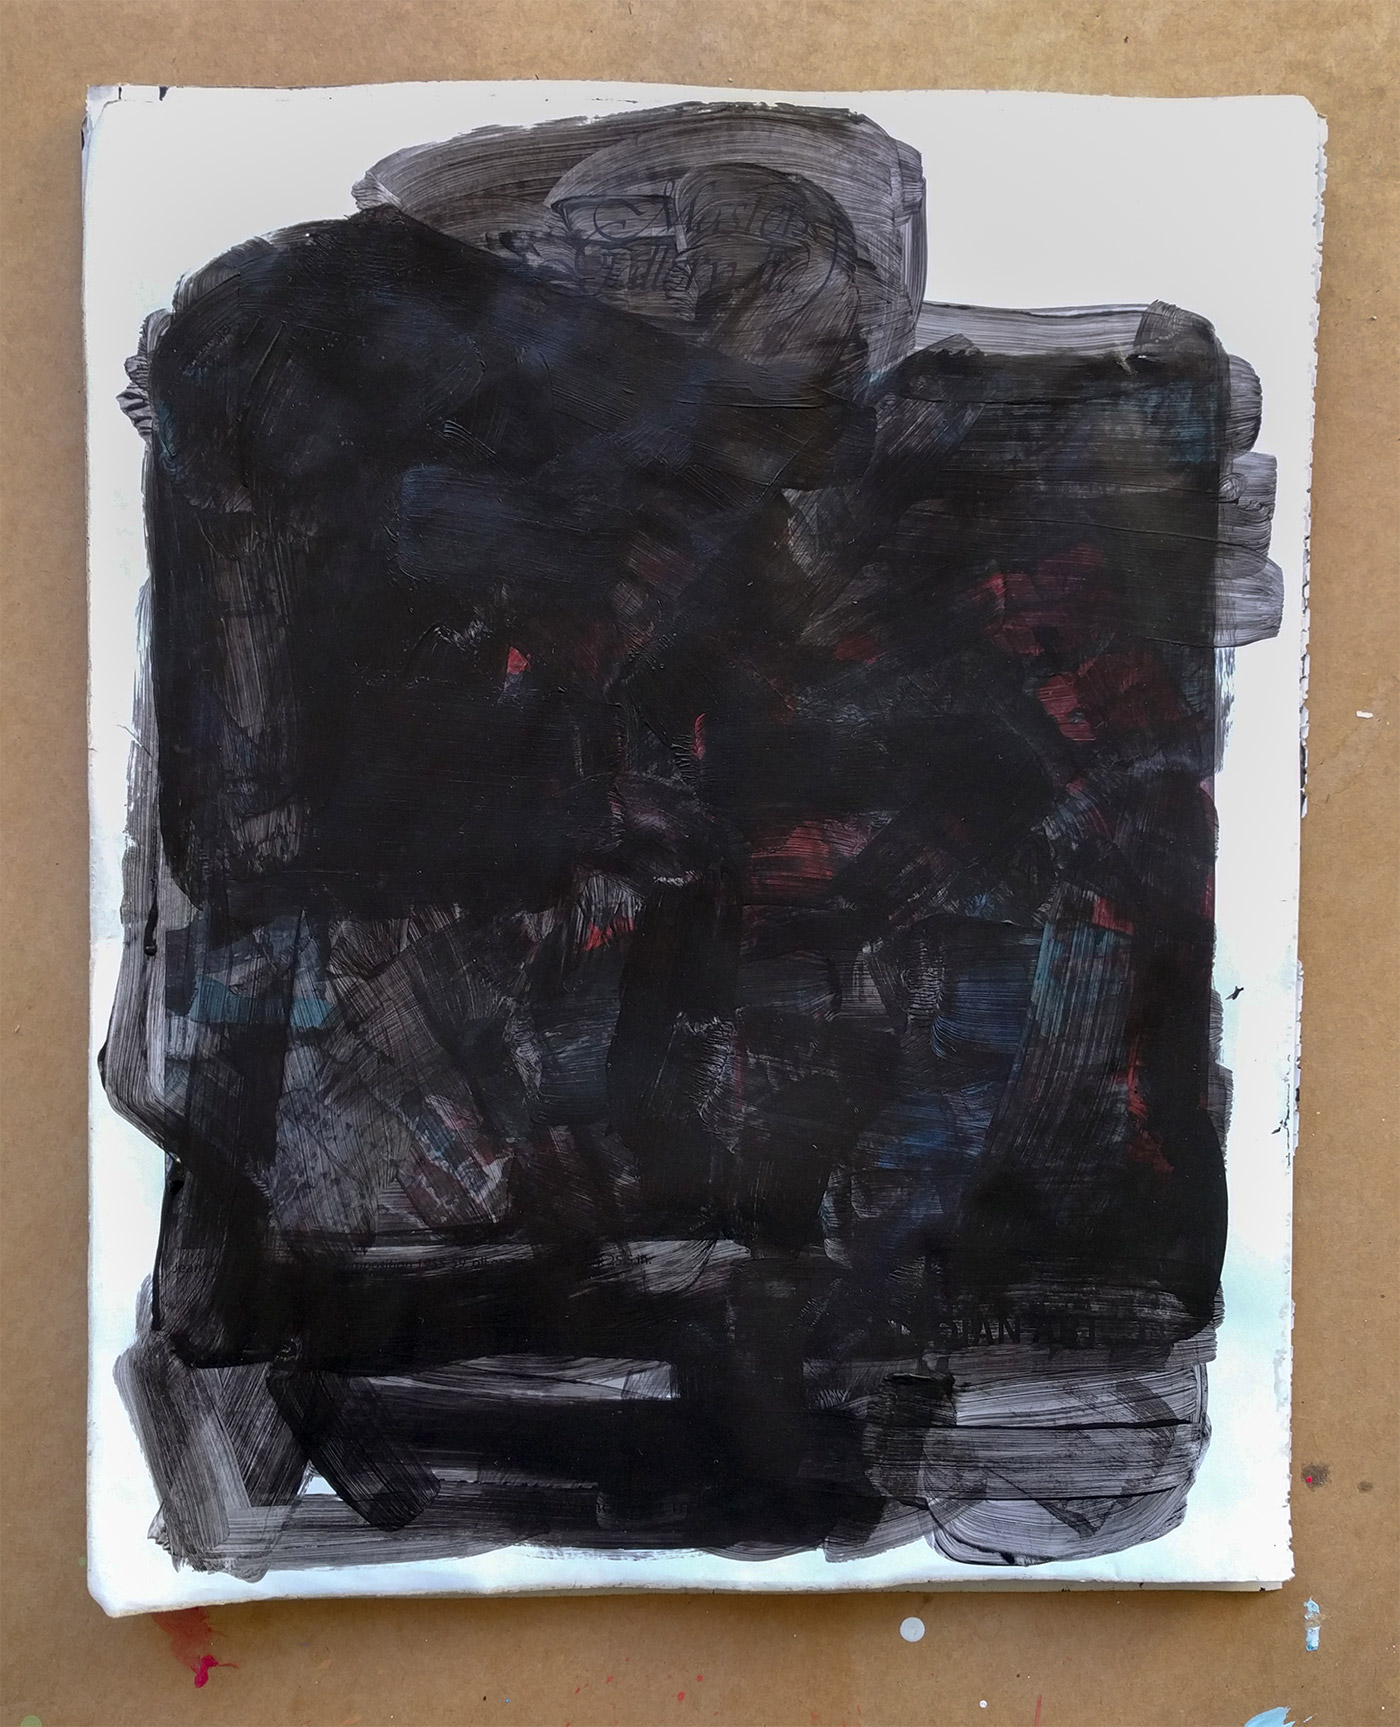 Blackout drawing - black acrylic on glossy art magazine page obscuring any images of art or people. 